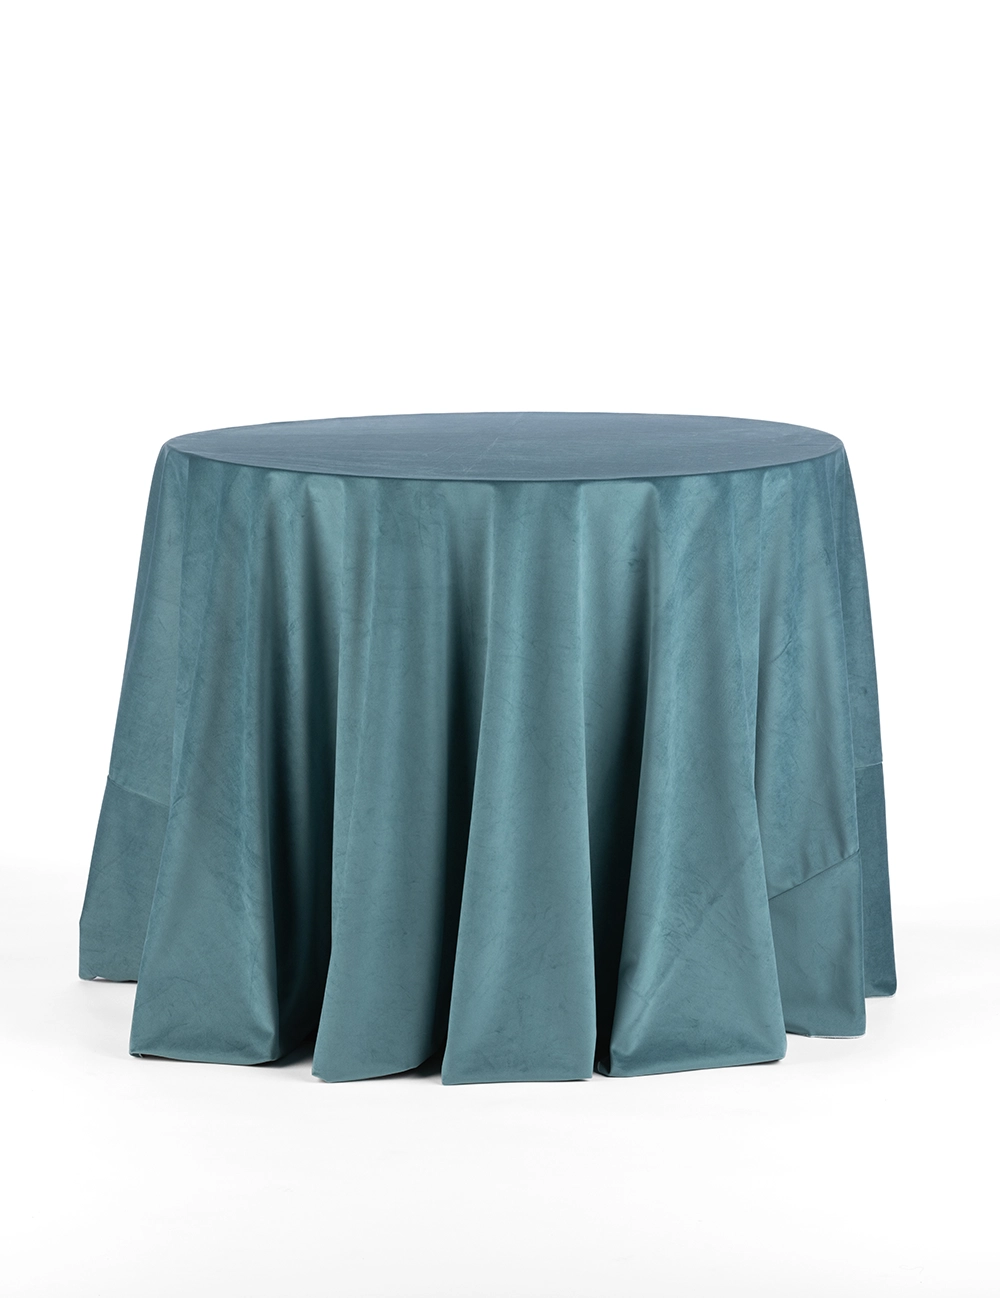 Deep Sea Tablecloth Full Table. Its rich teal-colored masterpiece will leave a lasting impression on any celebration.